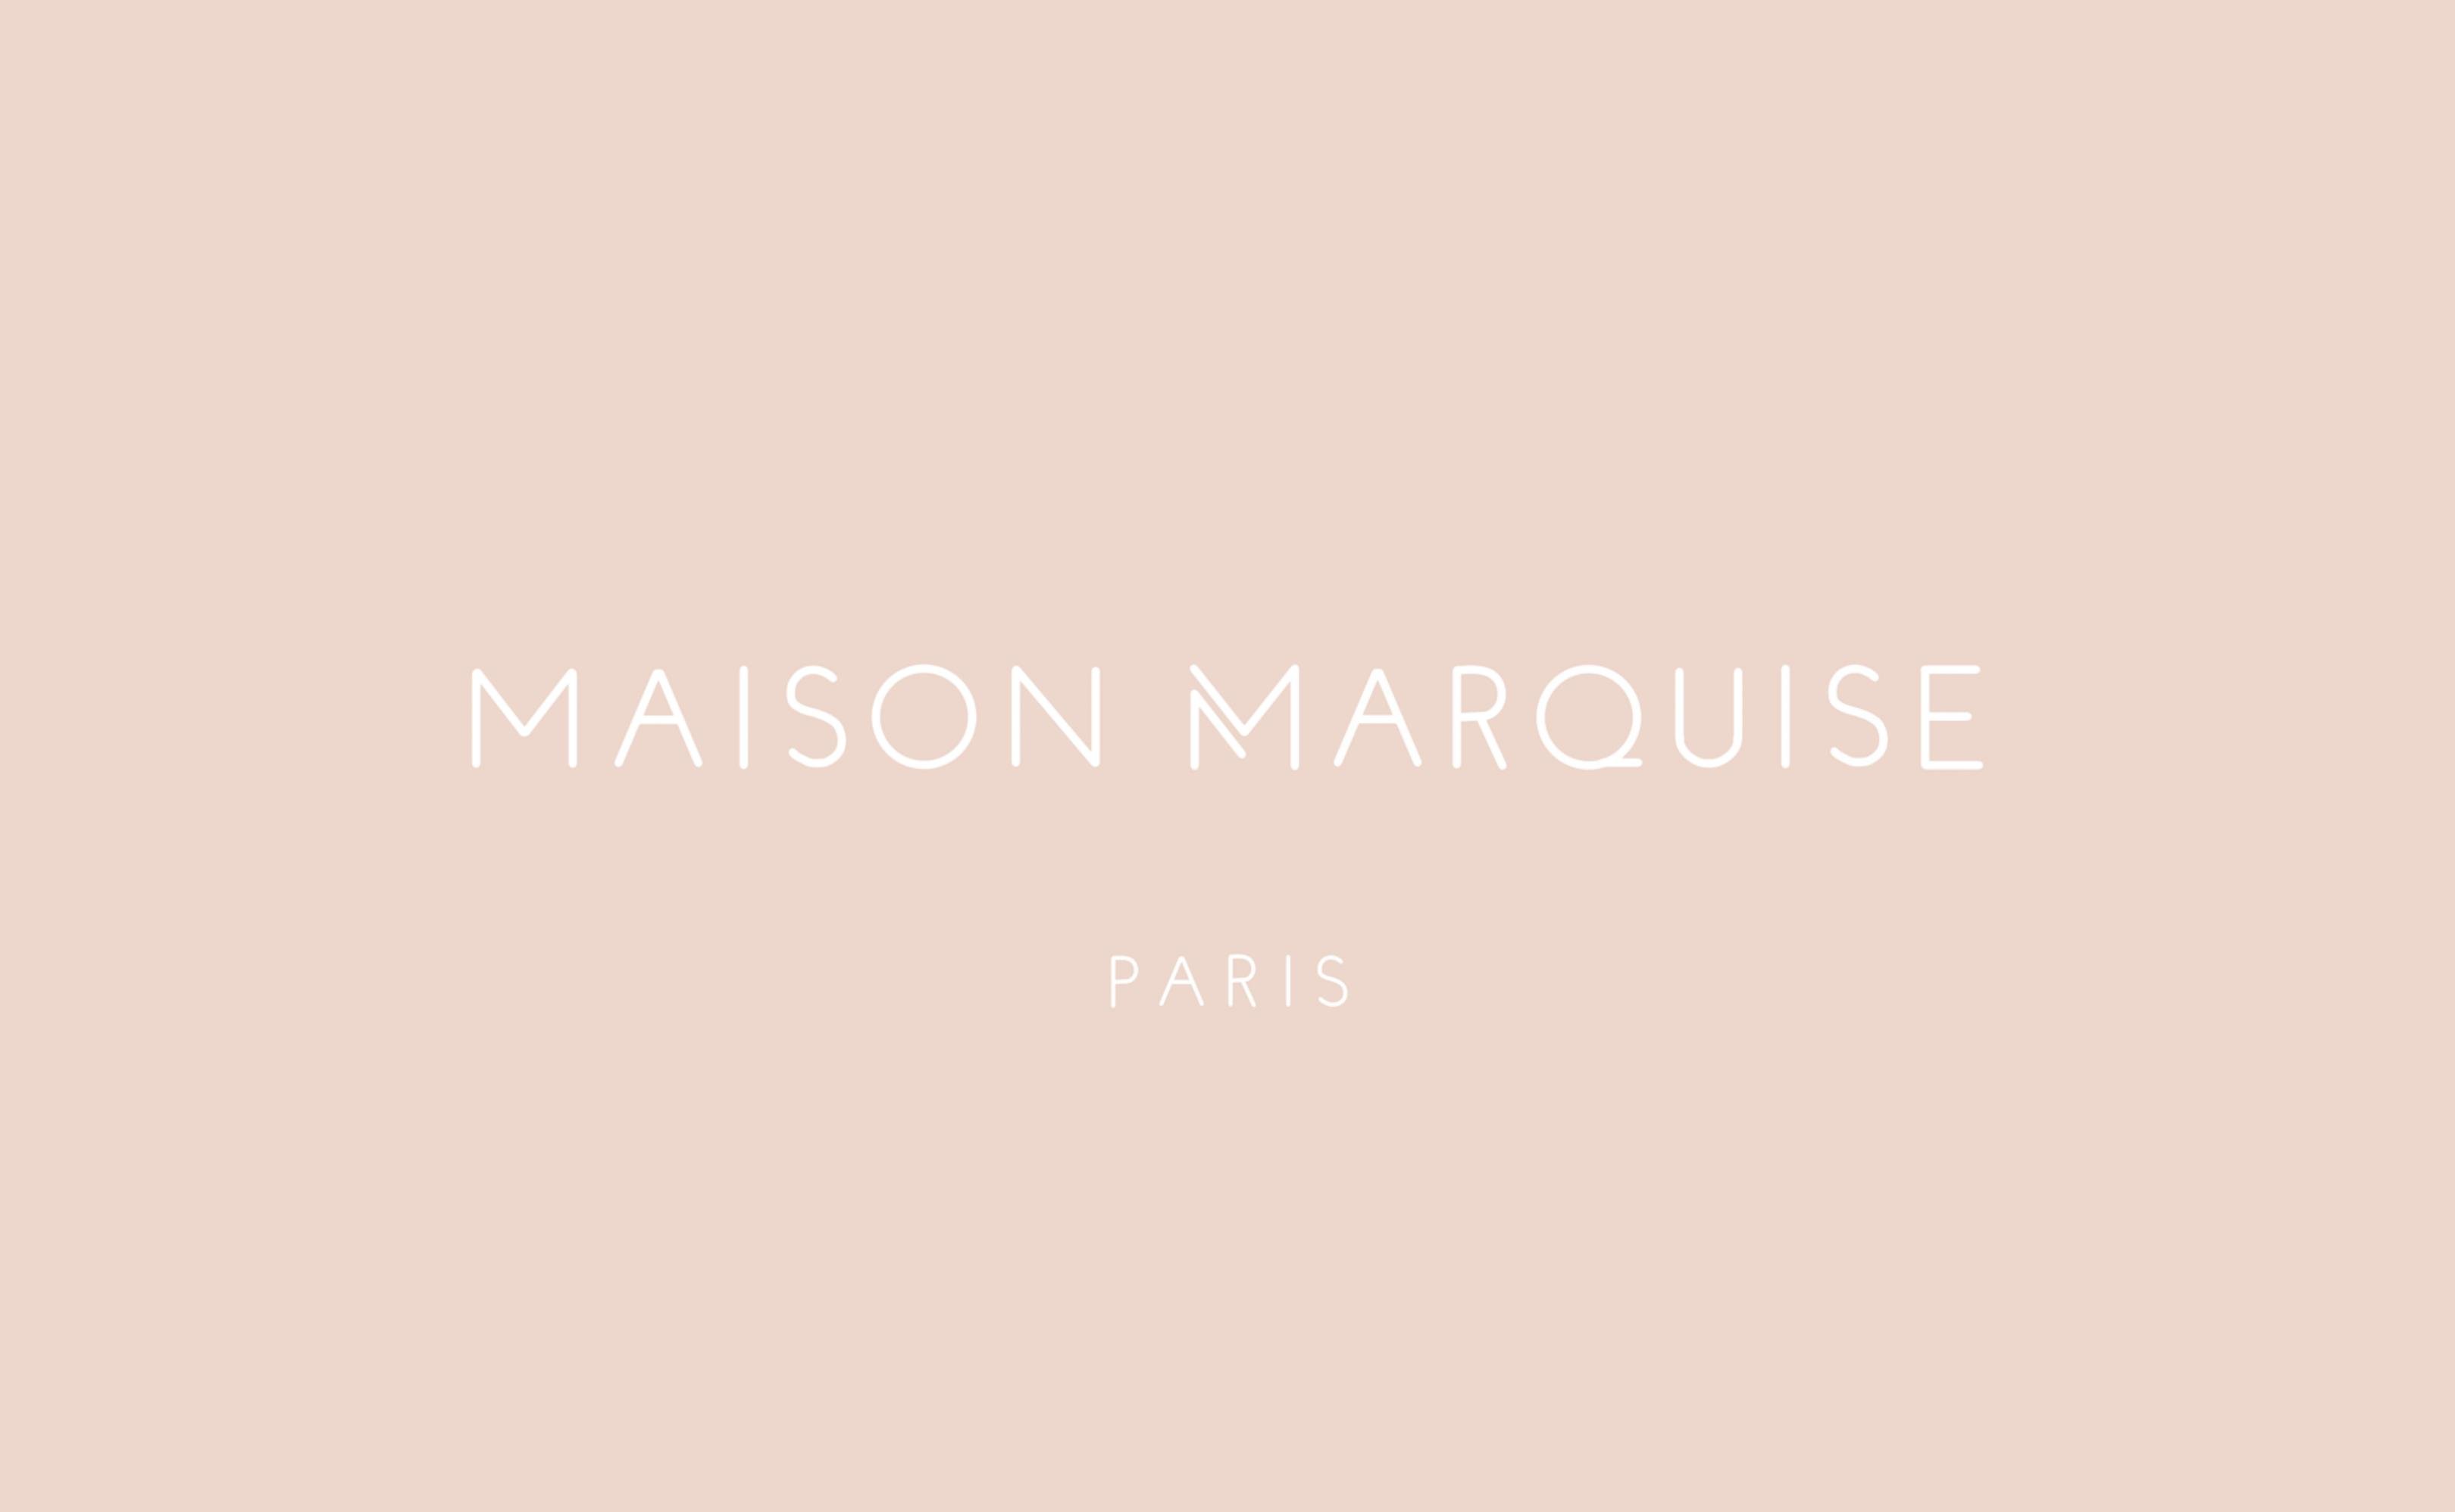 Jewelry Designer  Sparkle in #maisonmarquisejewelry
💌 info@maison-marquise.com 
📍 From Paris